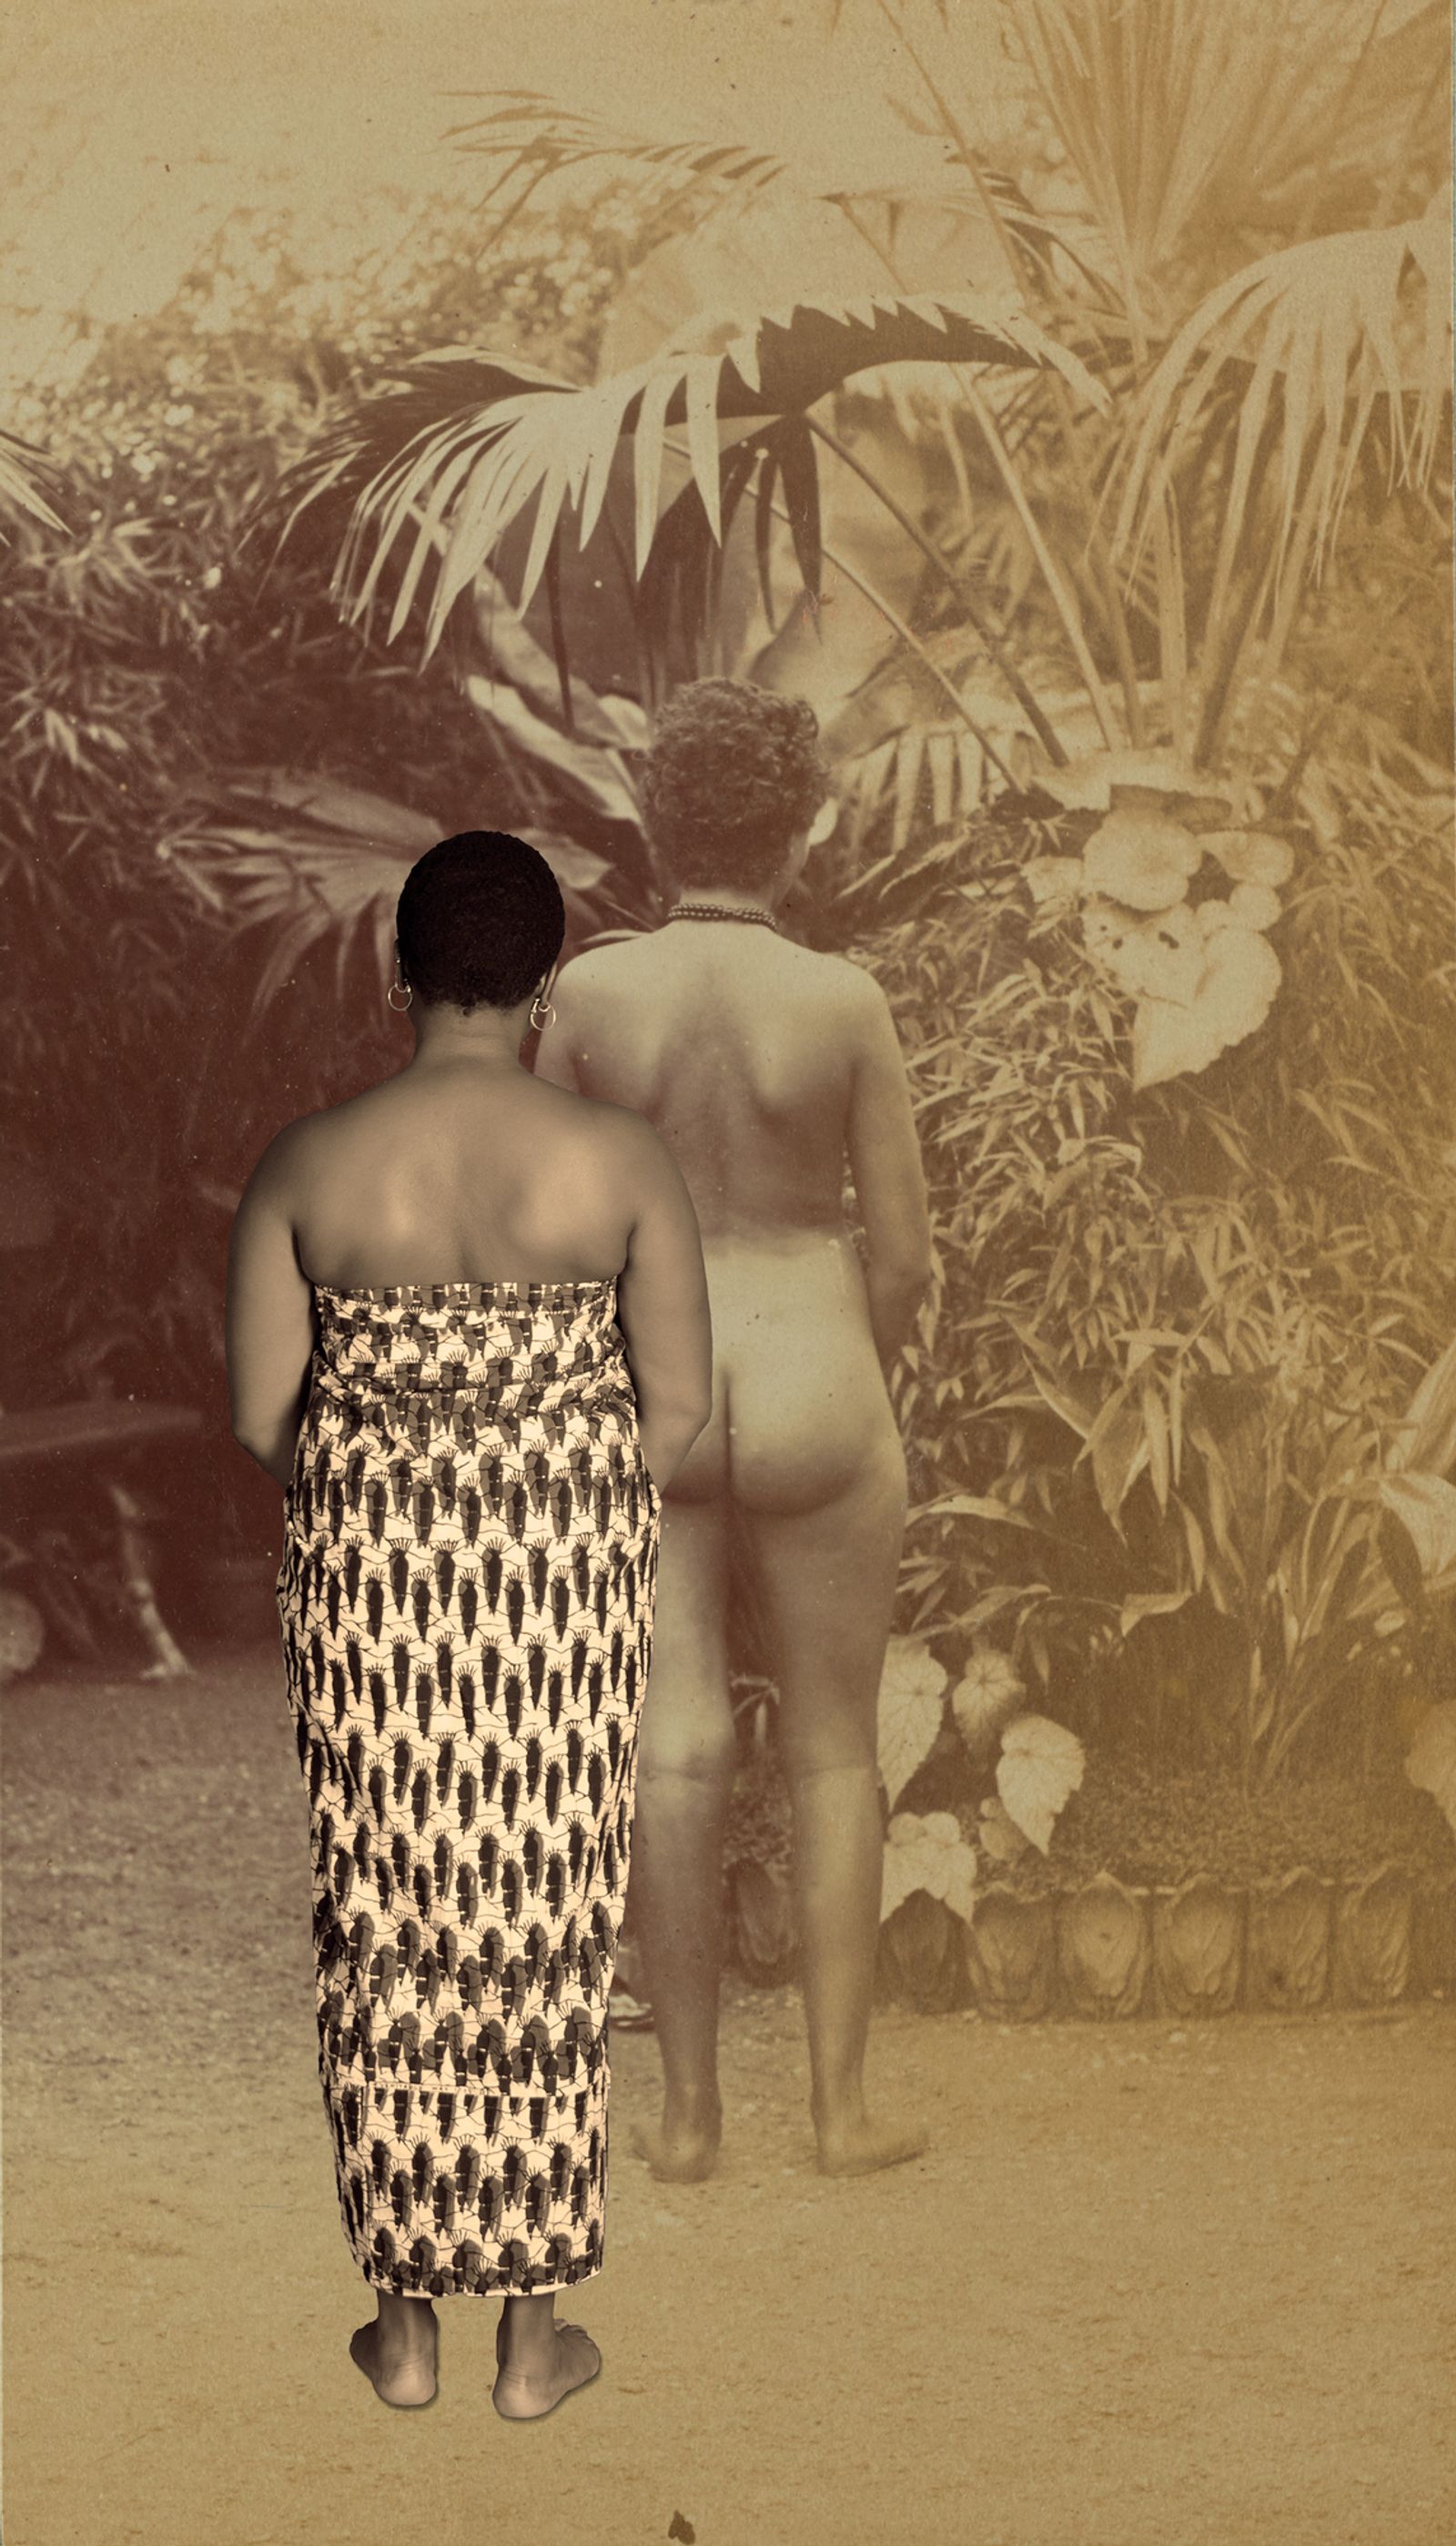 © Tayo Adekunle - Image from the Reclamation of the Exposition photography project